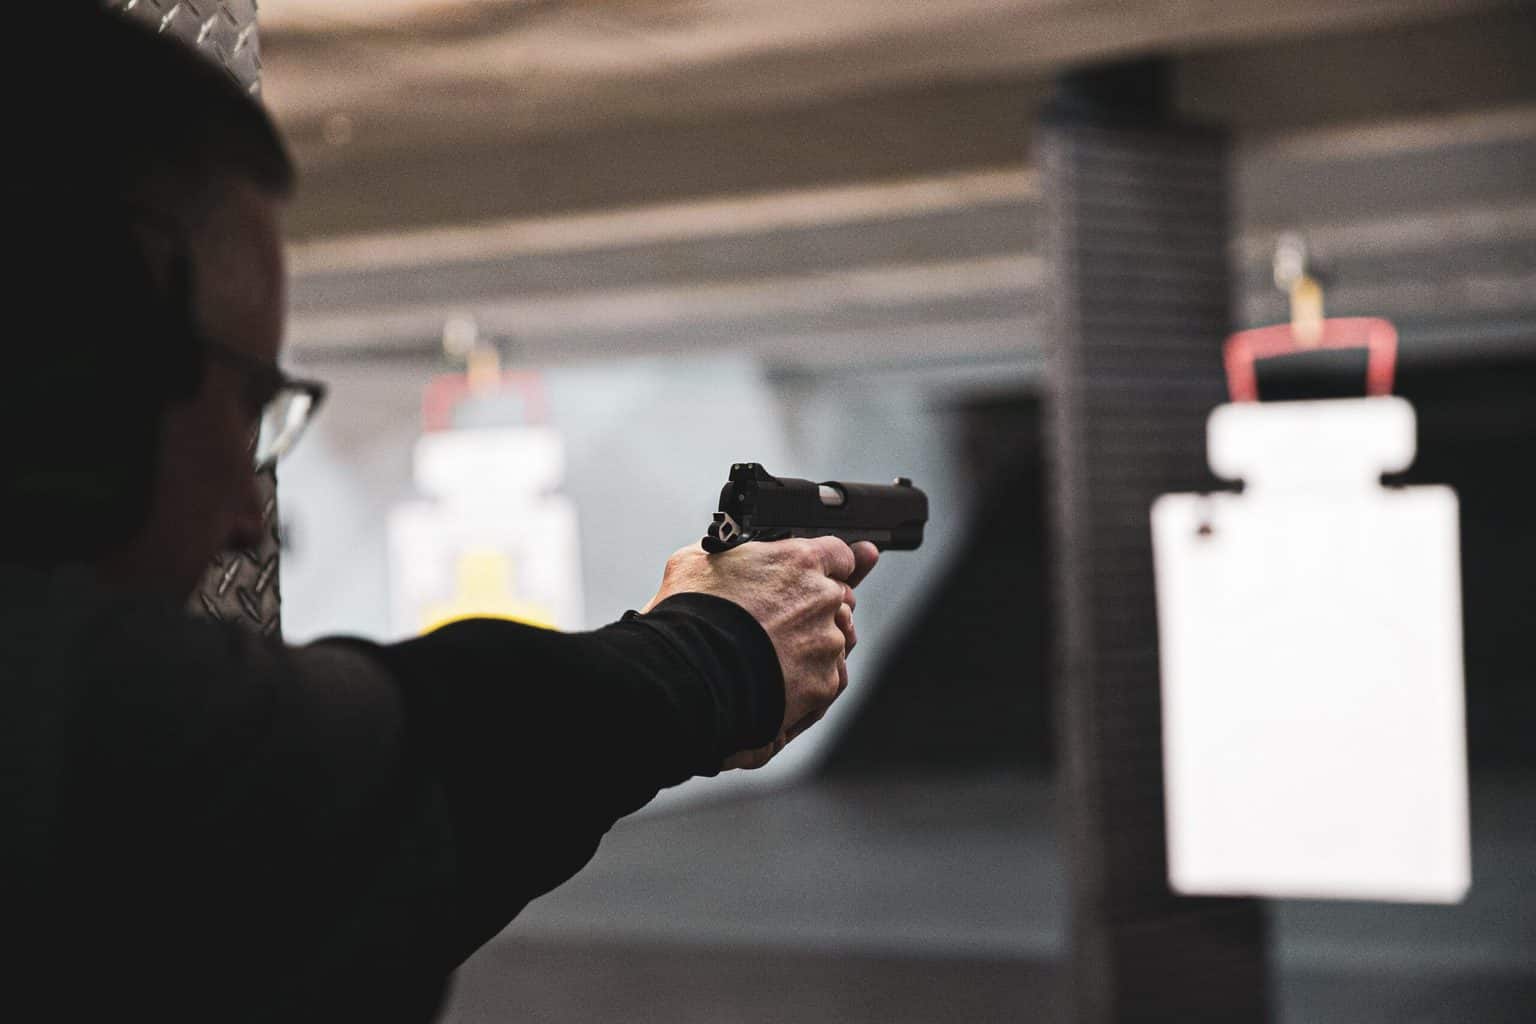 A guy doing a practice shooting with a pistol